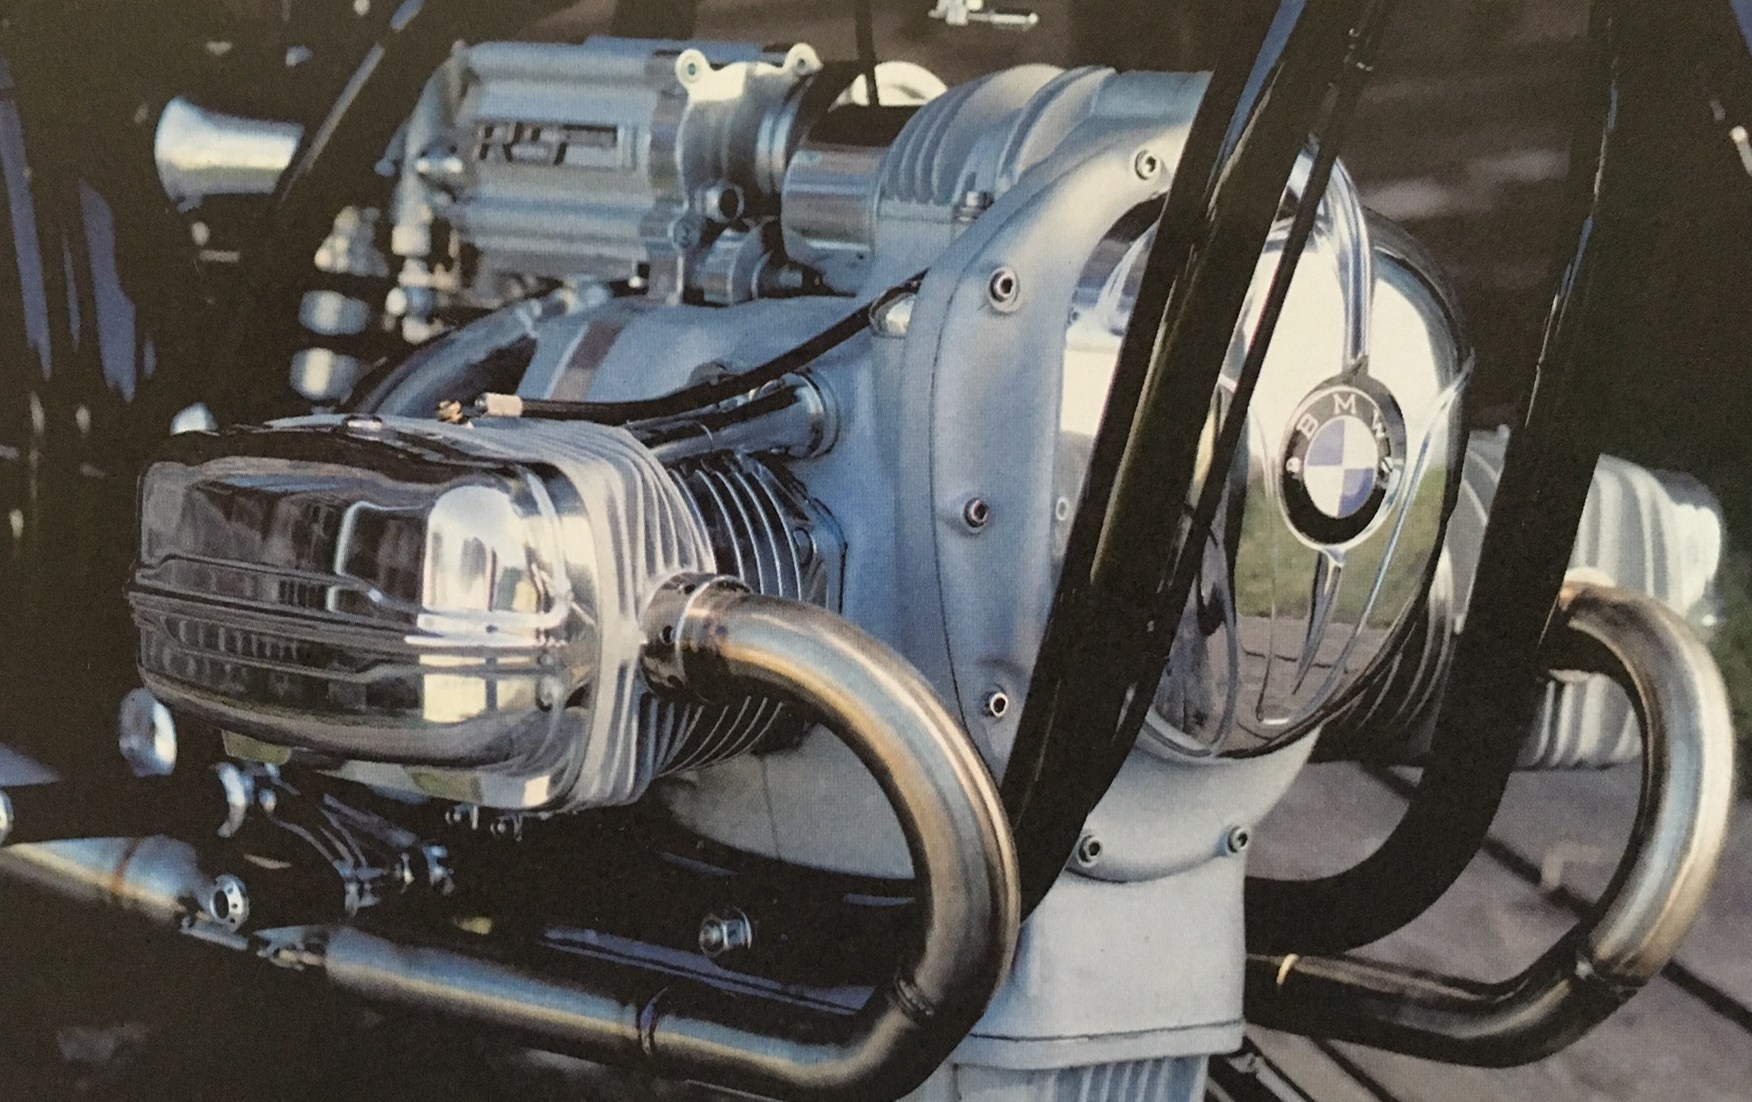 The Original R5 engine with a new Supercharger unit